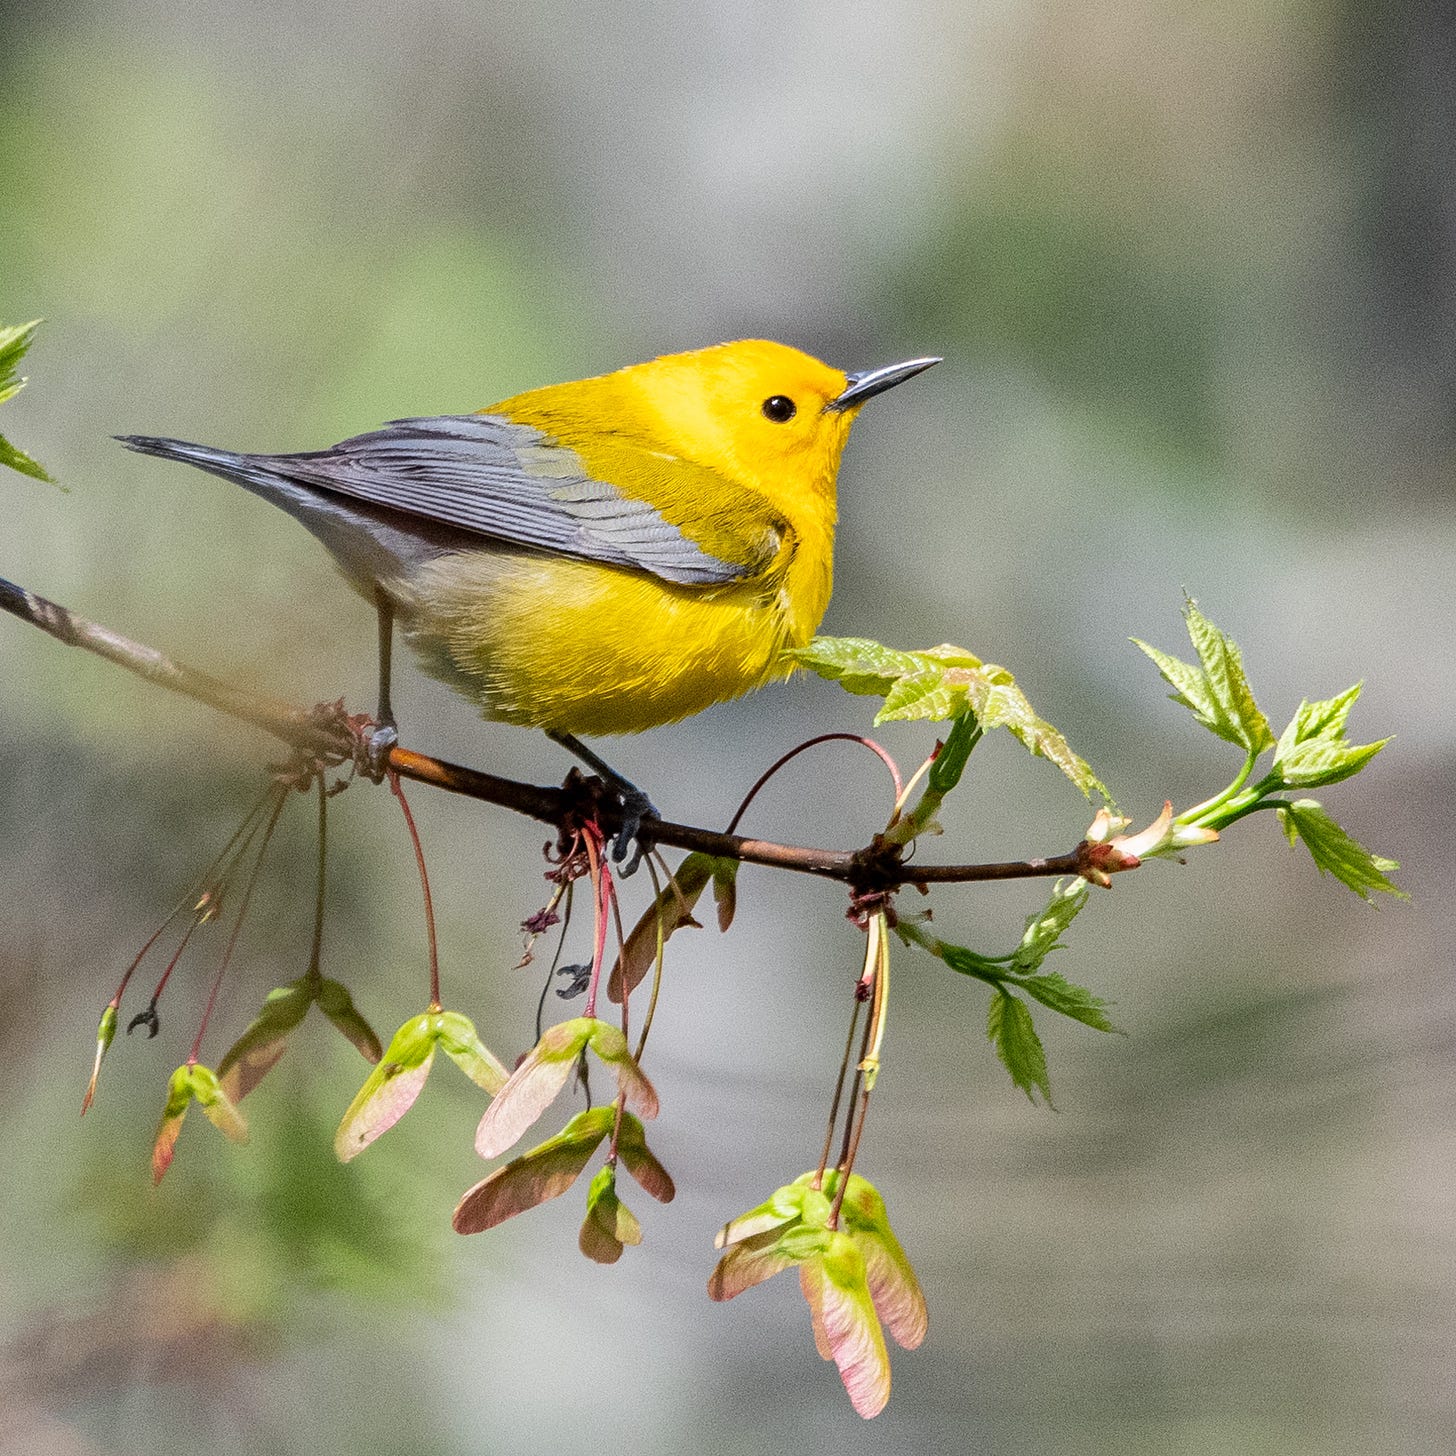 A small, plump, lemon-yellow bird, with slate-blue wings and a black bill, perches in profile on a leafing maple branch with fresh samaras